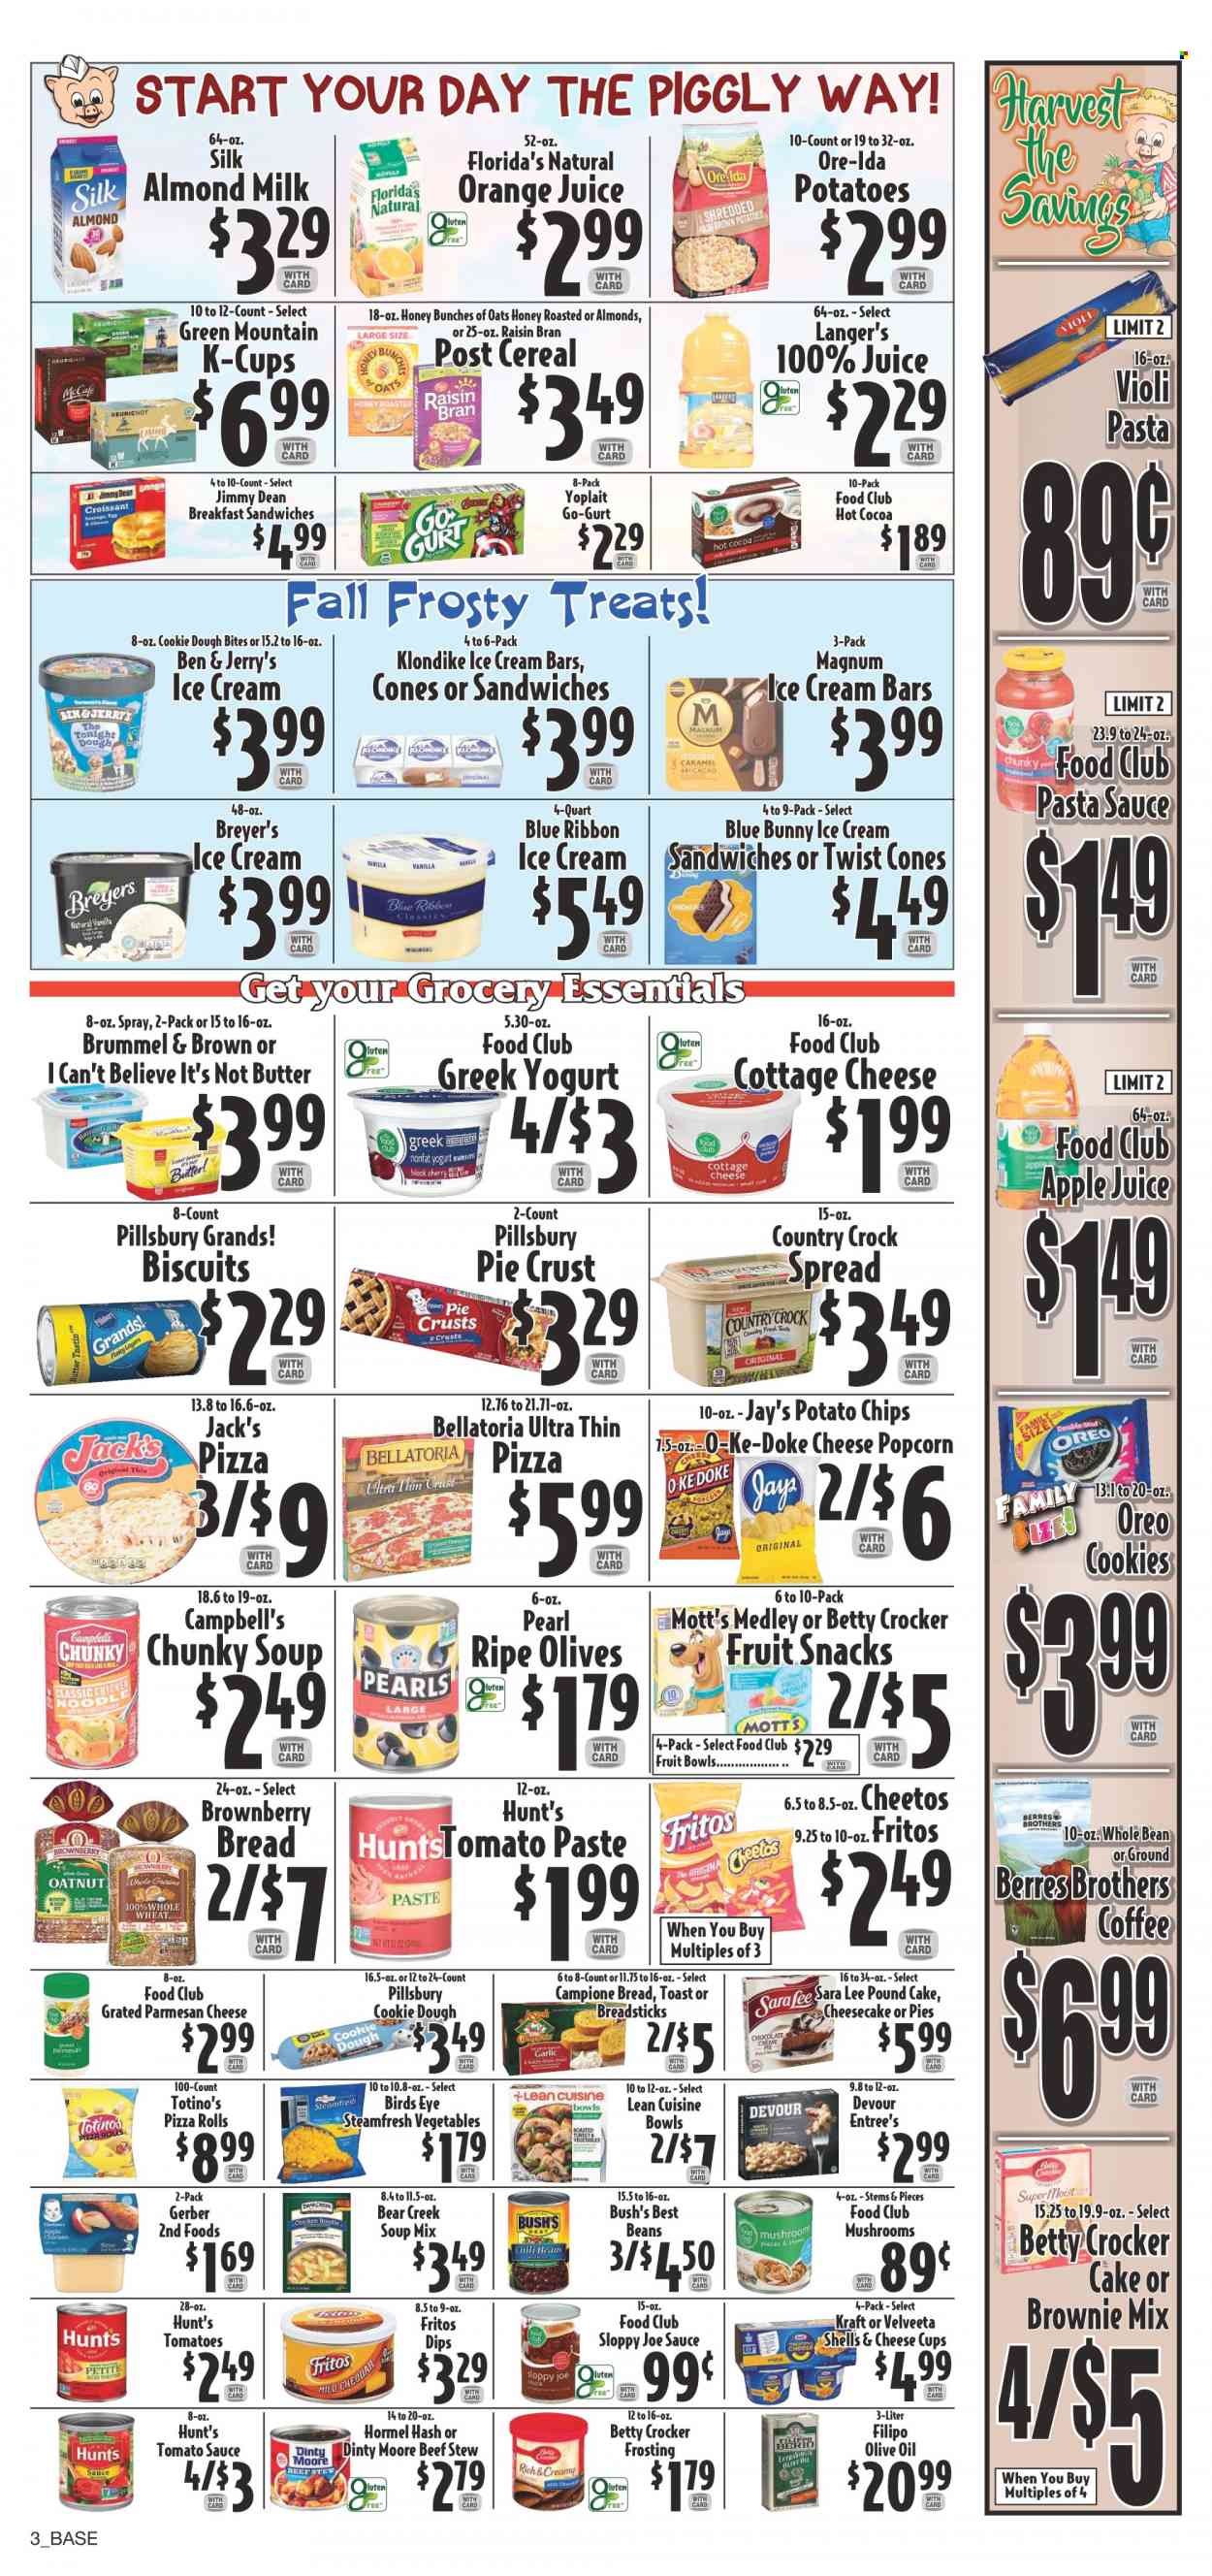 thumbnail - Piggly Wiggly Flyer - 10/05/2022 - 10/11/2022 - Sales products - cake, pizza rolls, Blue Ribbon, Sara Lee, pound cake, brownie mix, Mott's, Campbell's, pizza, pasta sauce, soup mix, soup, sauce, Pillsbury, Bird's Eye, Lean Cuisine, Kraft®, Jimmy Dean, Hormel, cottage cheese, cheese cup, parmesan, greek yoghurt, Oreo, yoghurt, Yoplait, almond milk, milk, Silk, butter, I Can't Believe It's Not Butter, Magnum, ice cream, ice cream bars, Ben & Jerry's, Blue Bunny, Devour, Ore-Ida, Bellatoria, cookies, biscuit, fruit snack, Florida's Natural, bread sticks, Fritos, Gerber, potato chips, Cheetos, chips, popcorn, frosting, pie crust, tomato paste, tomato sauce, olives, cereals, Raisin Bran, olive oil, oil, apple juice, orange juice, juice, hot cocoa, coffee, coffee capsules, K-Cups, Green Mountain, BROTHERS. Page 3.